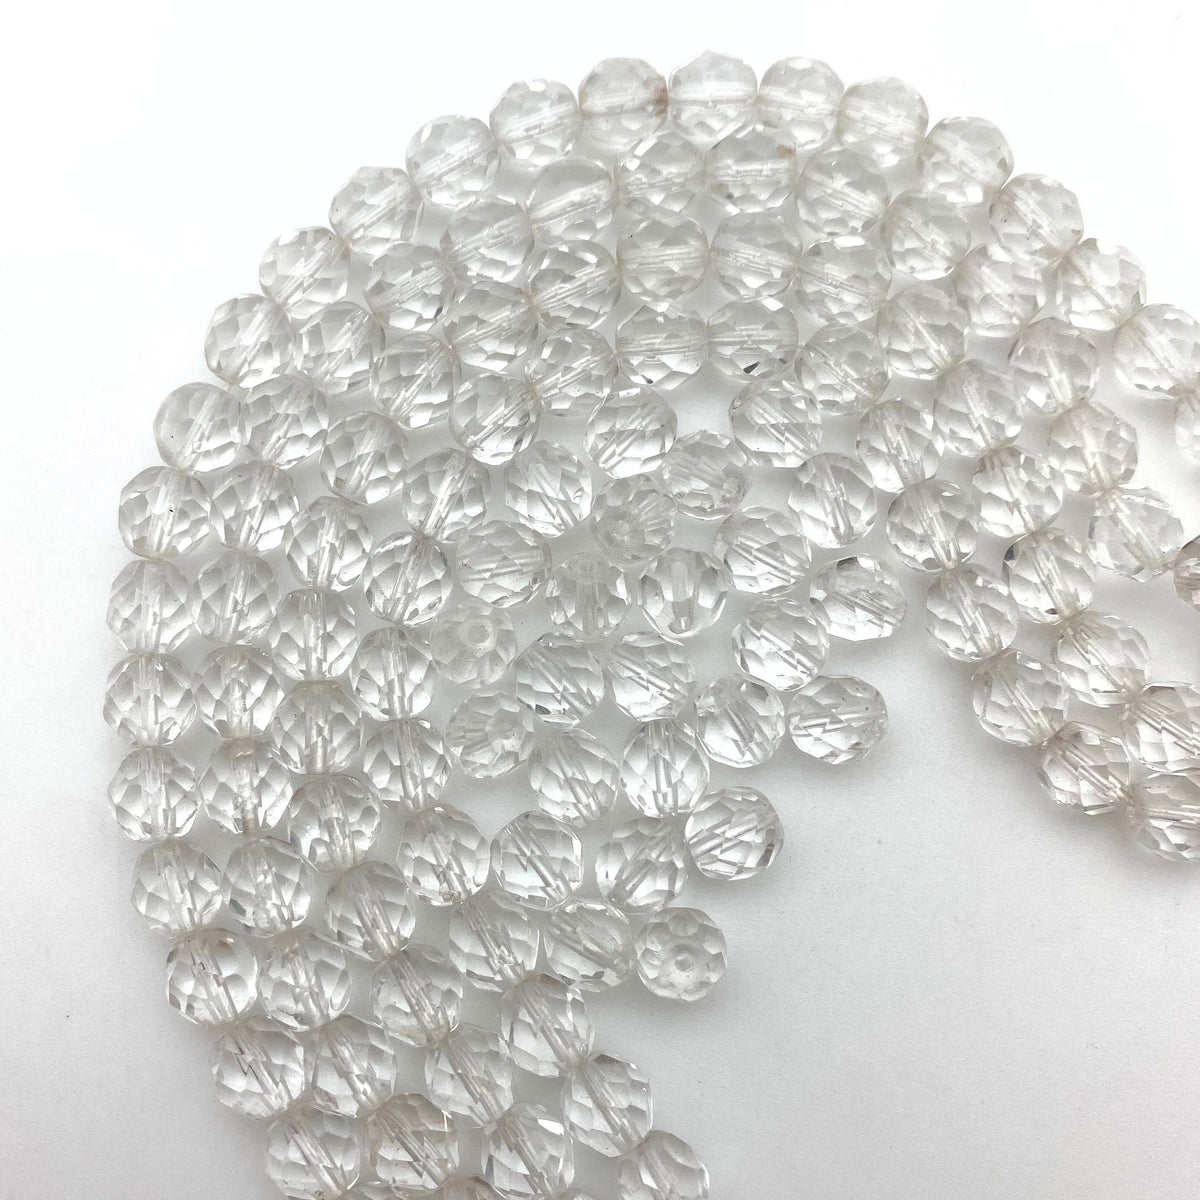 Czech Round Smooth Pressed Glass Beads in Clear Crystal, 2mm, 3mm